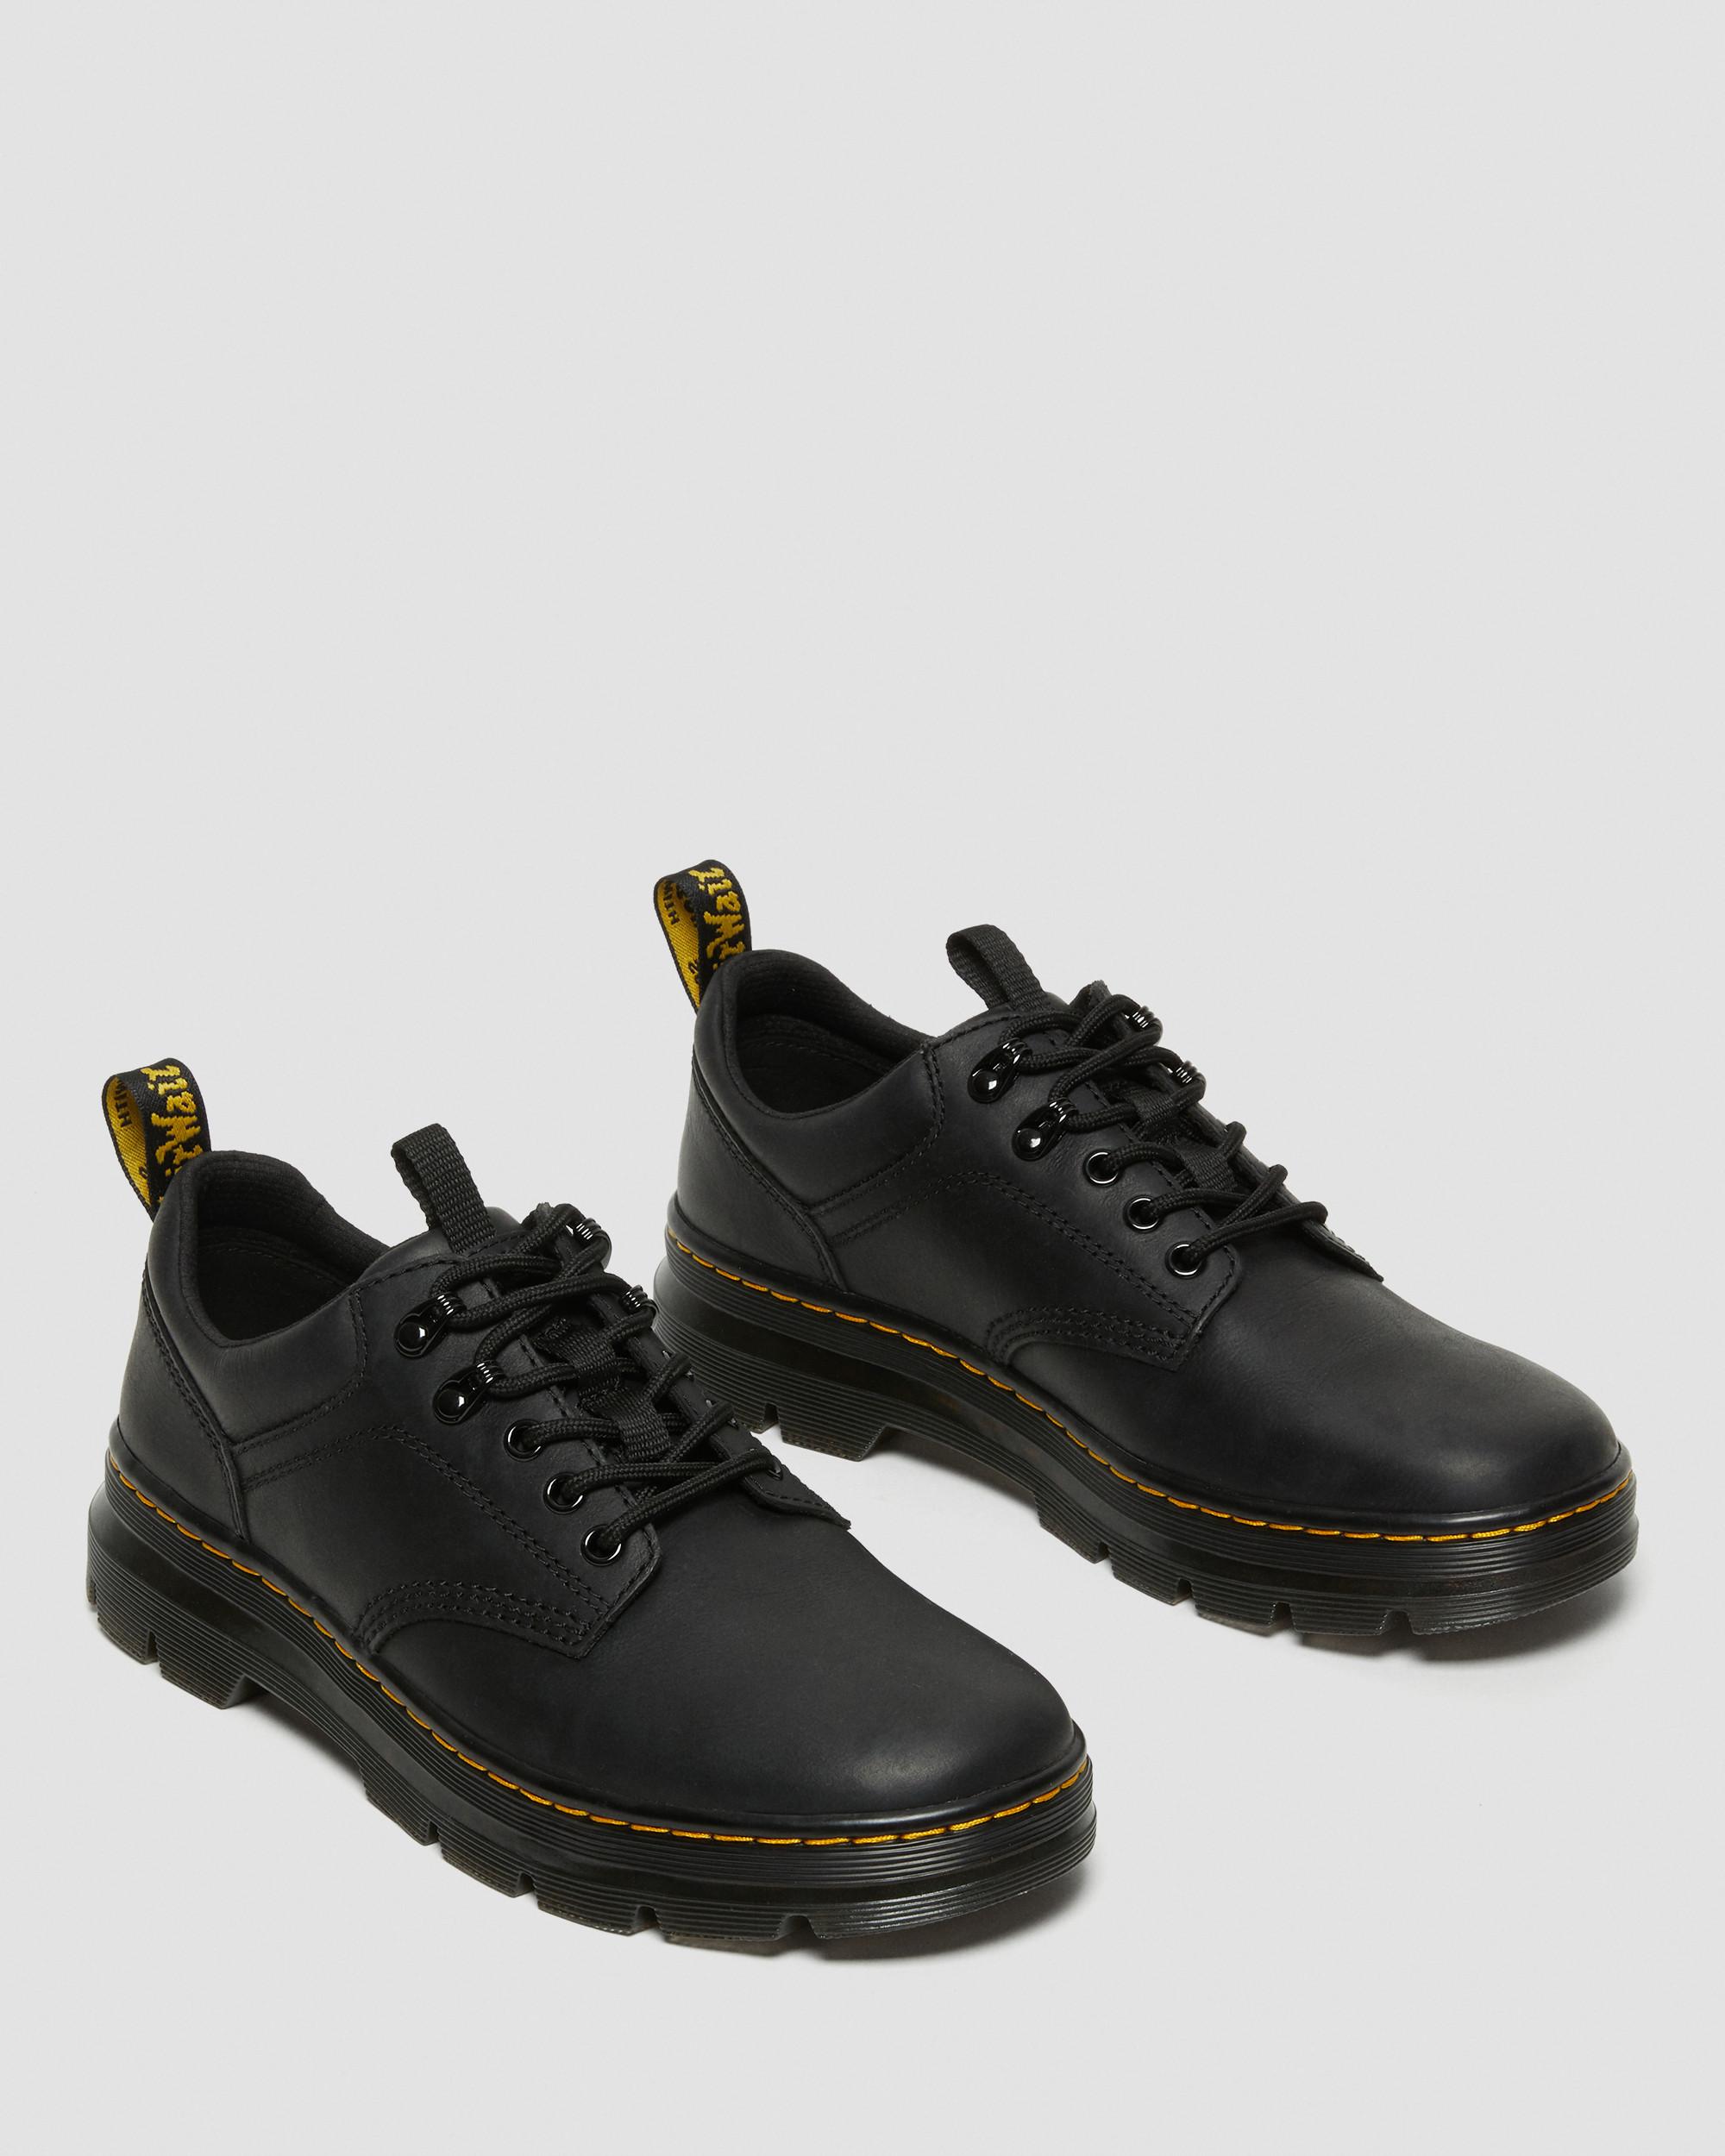 Reeder Wyoming Leather Utility Shoes in Black